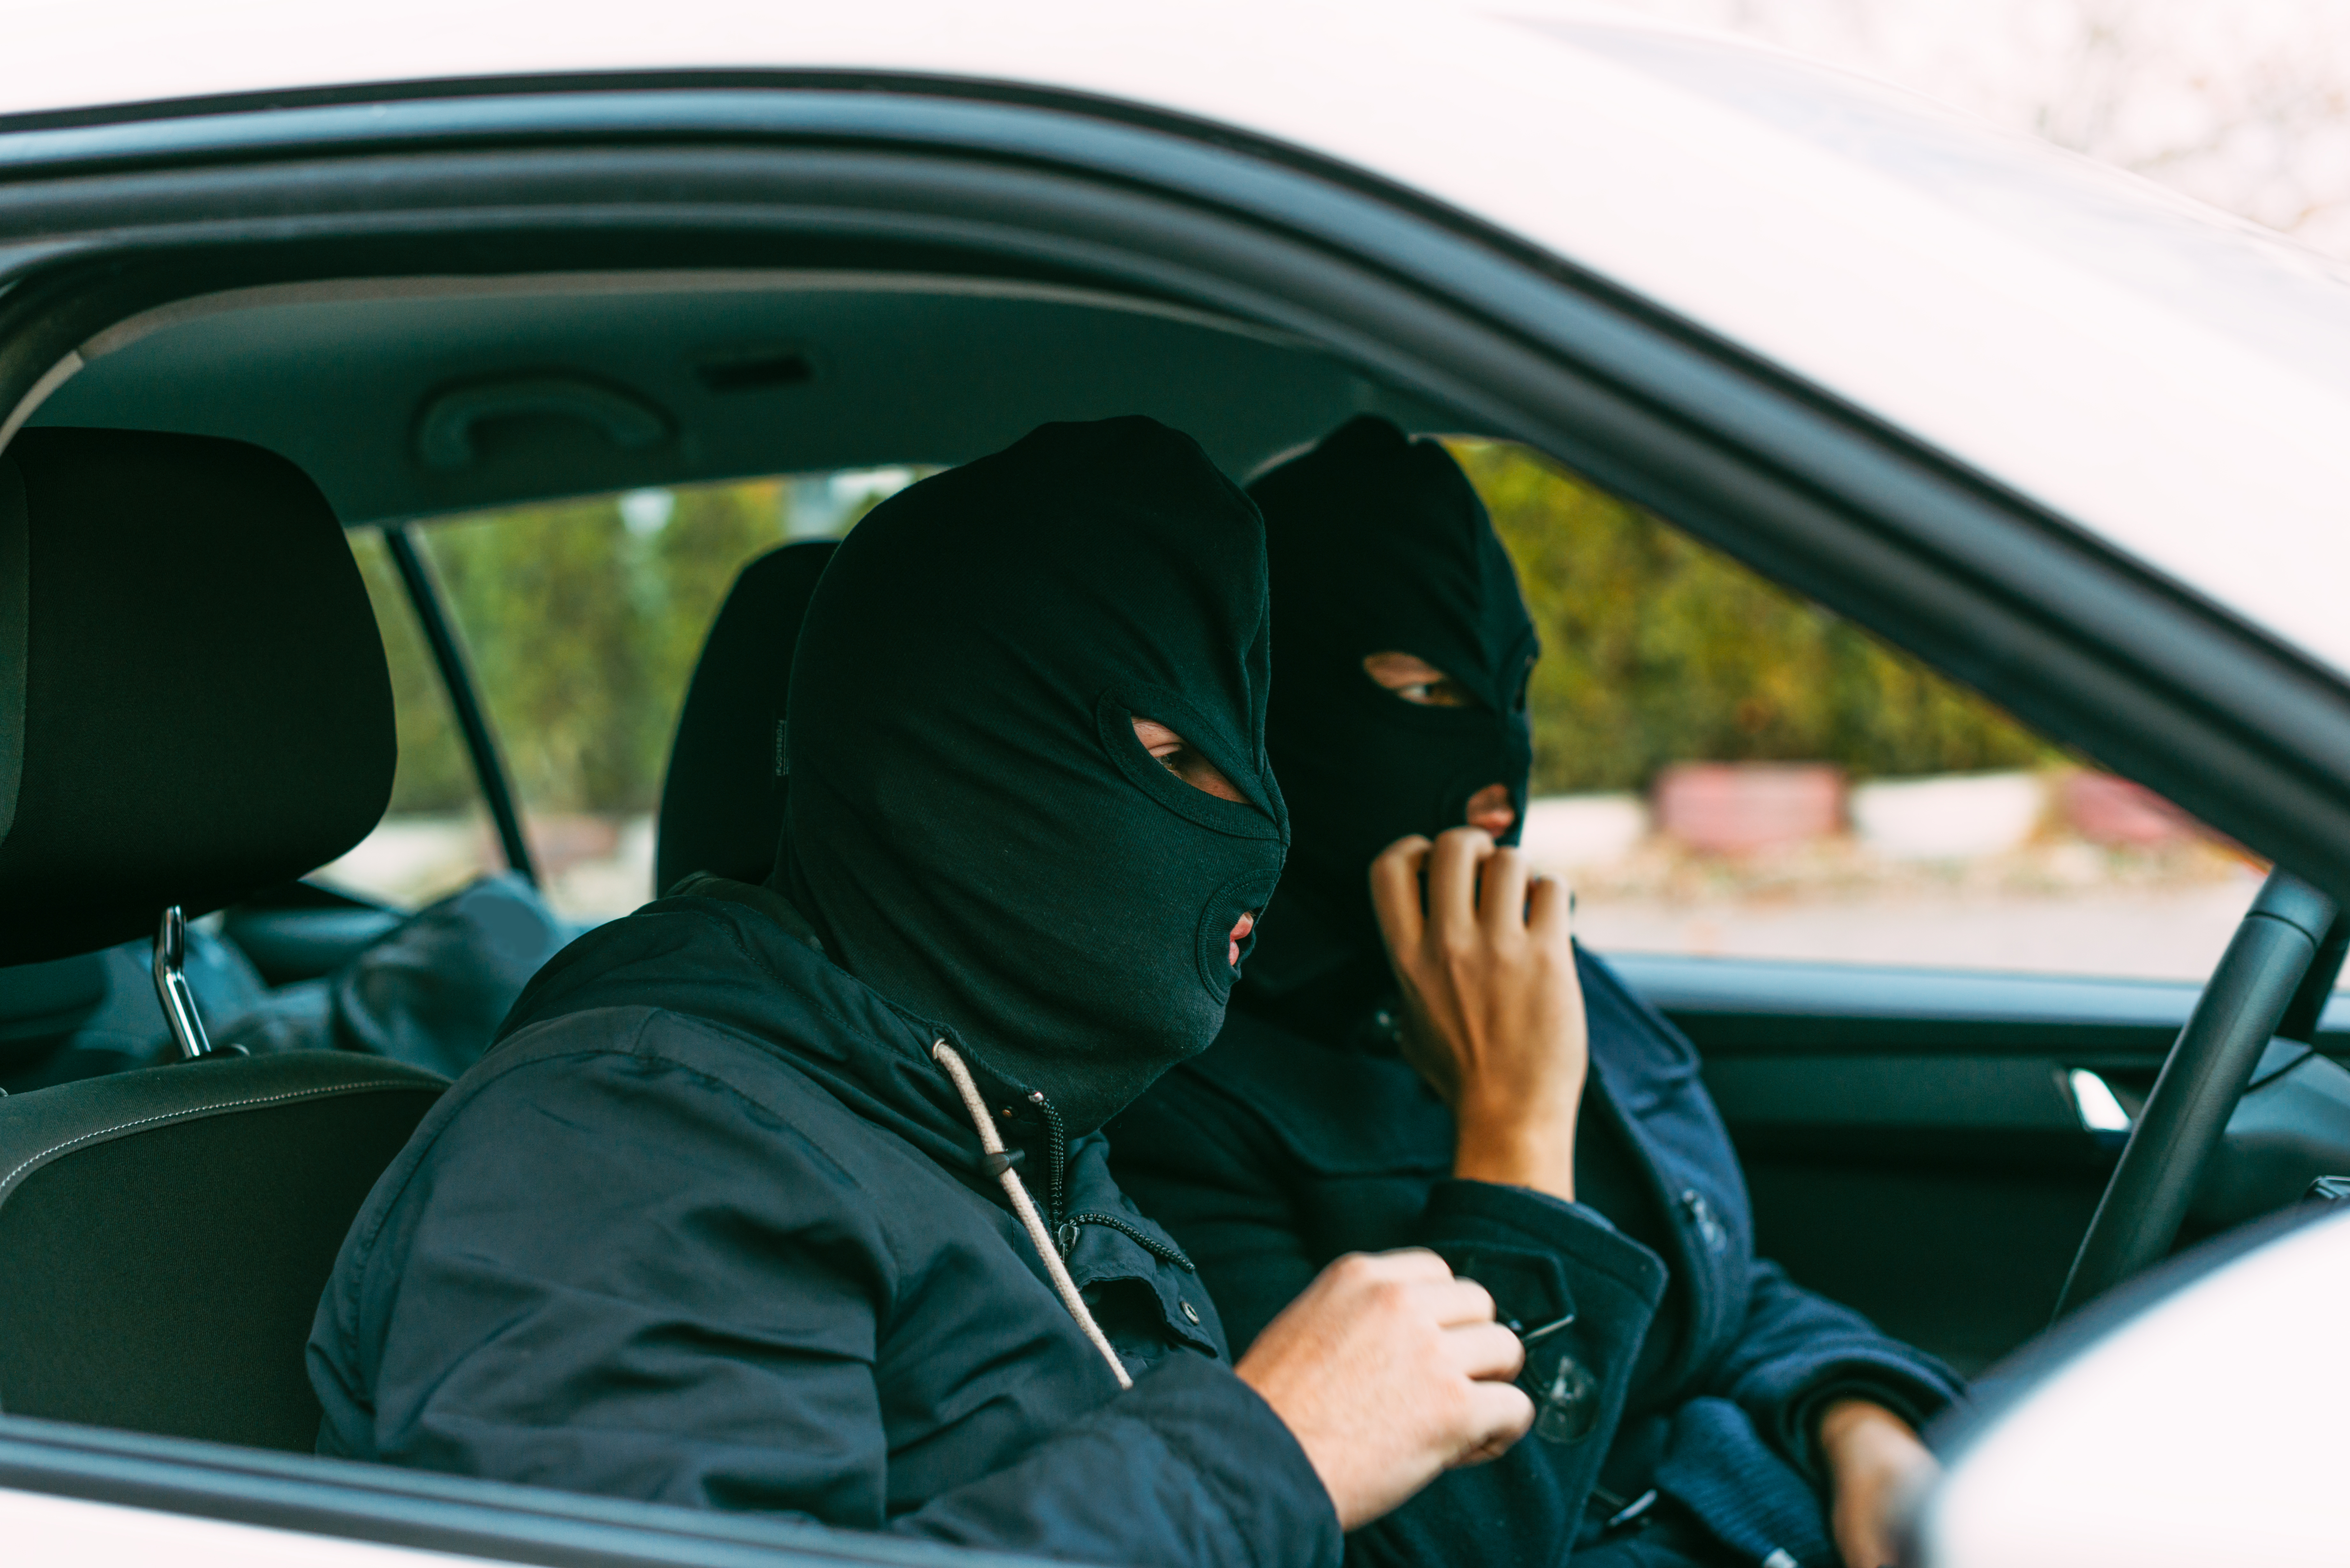 Gangsters putting their mask on,prepared to do their next robbery. | Source: Shutterstock